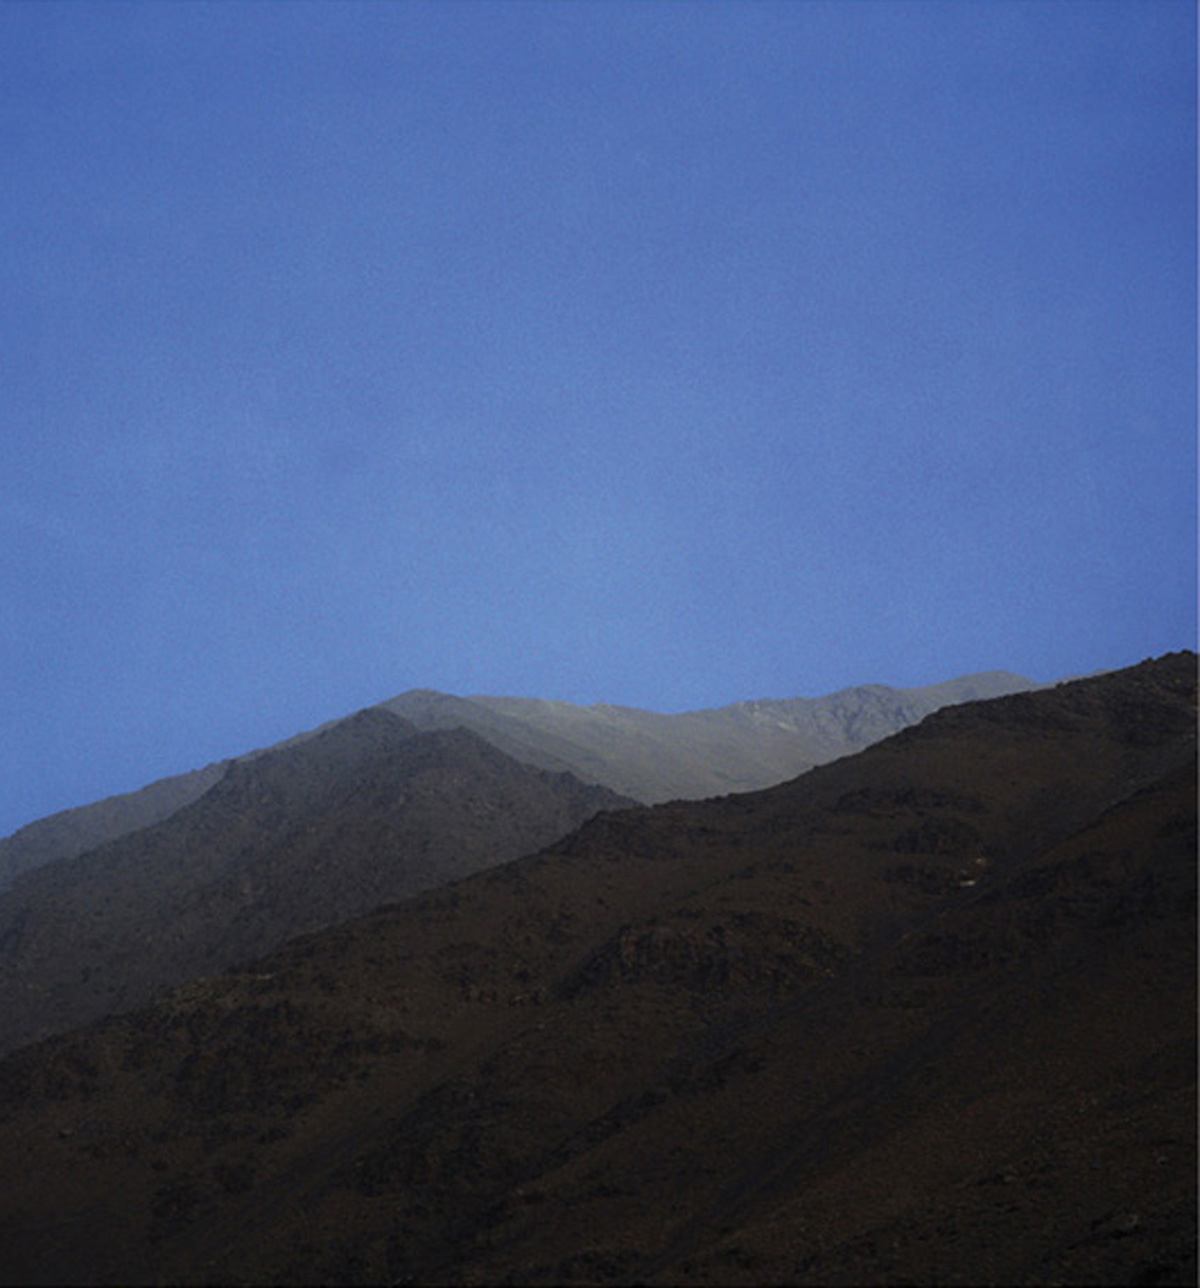 A photograph by artist Marine Hugonnier titled “Mountain with No Name (Pandjshêr Valley, Afghanistan)”, two thousand three.